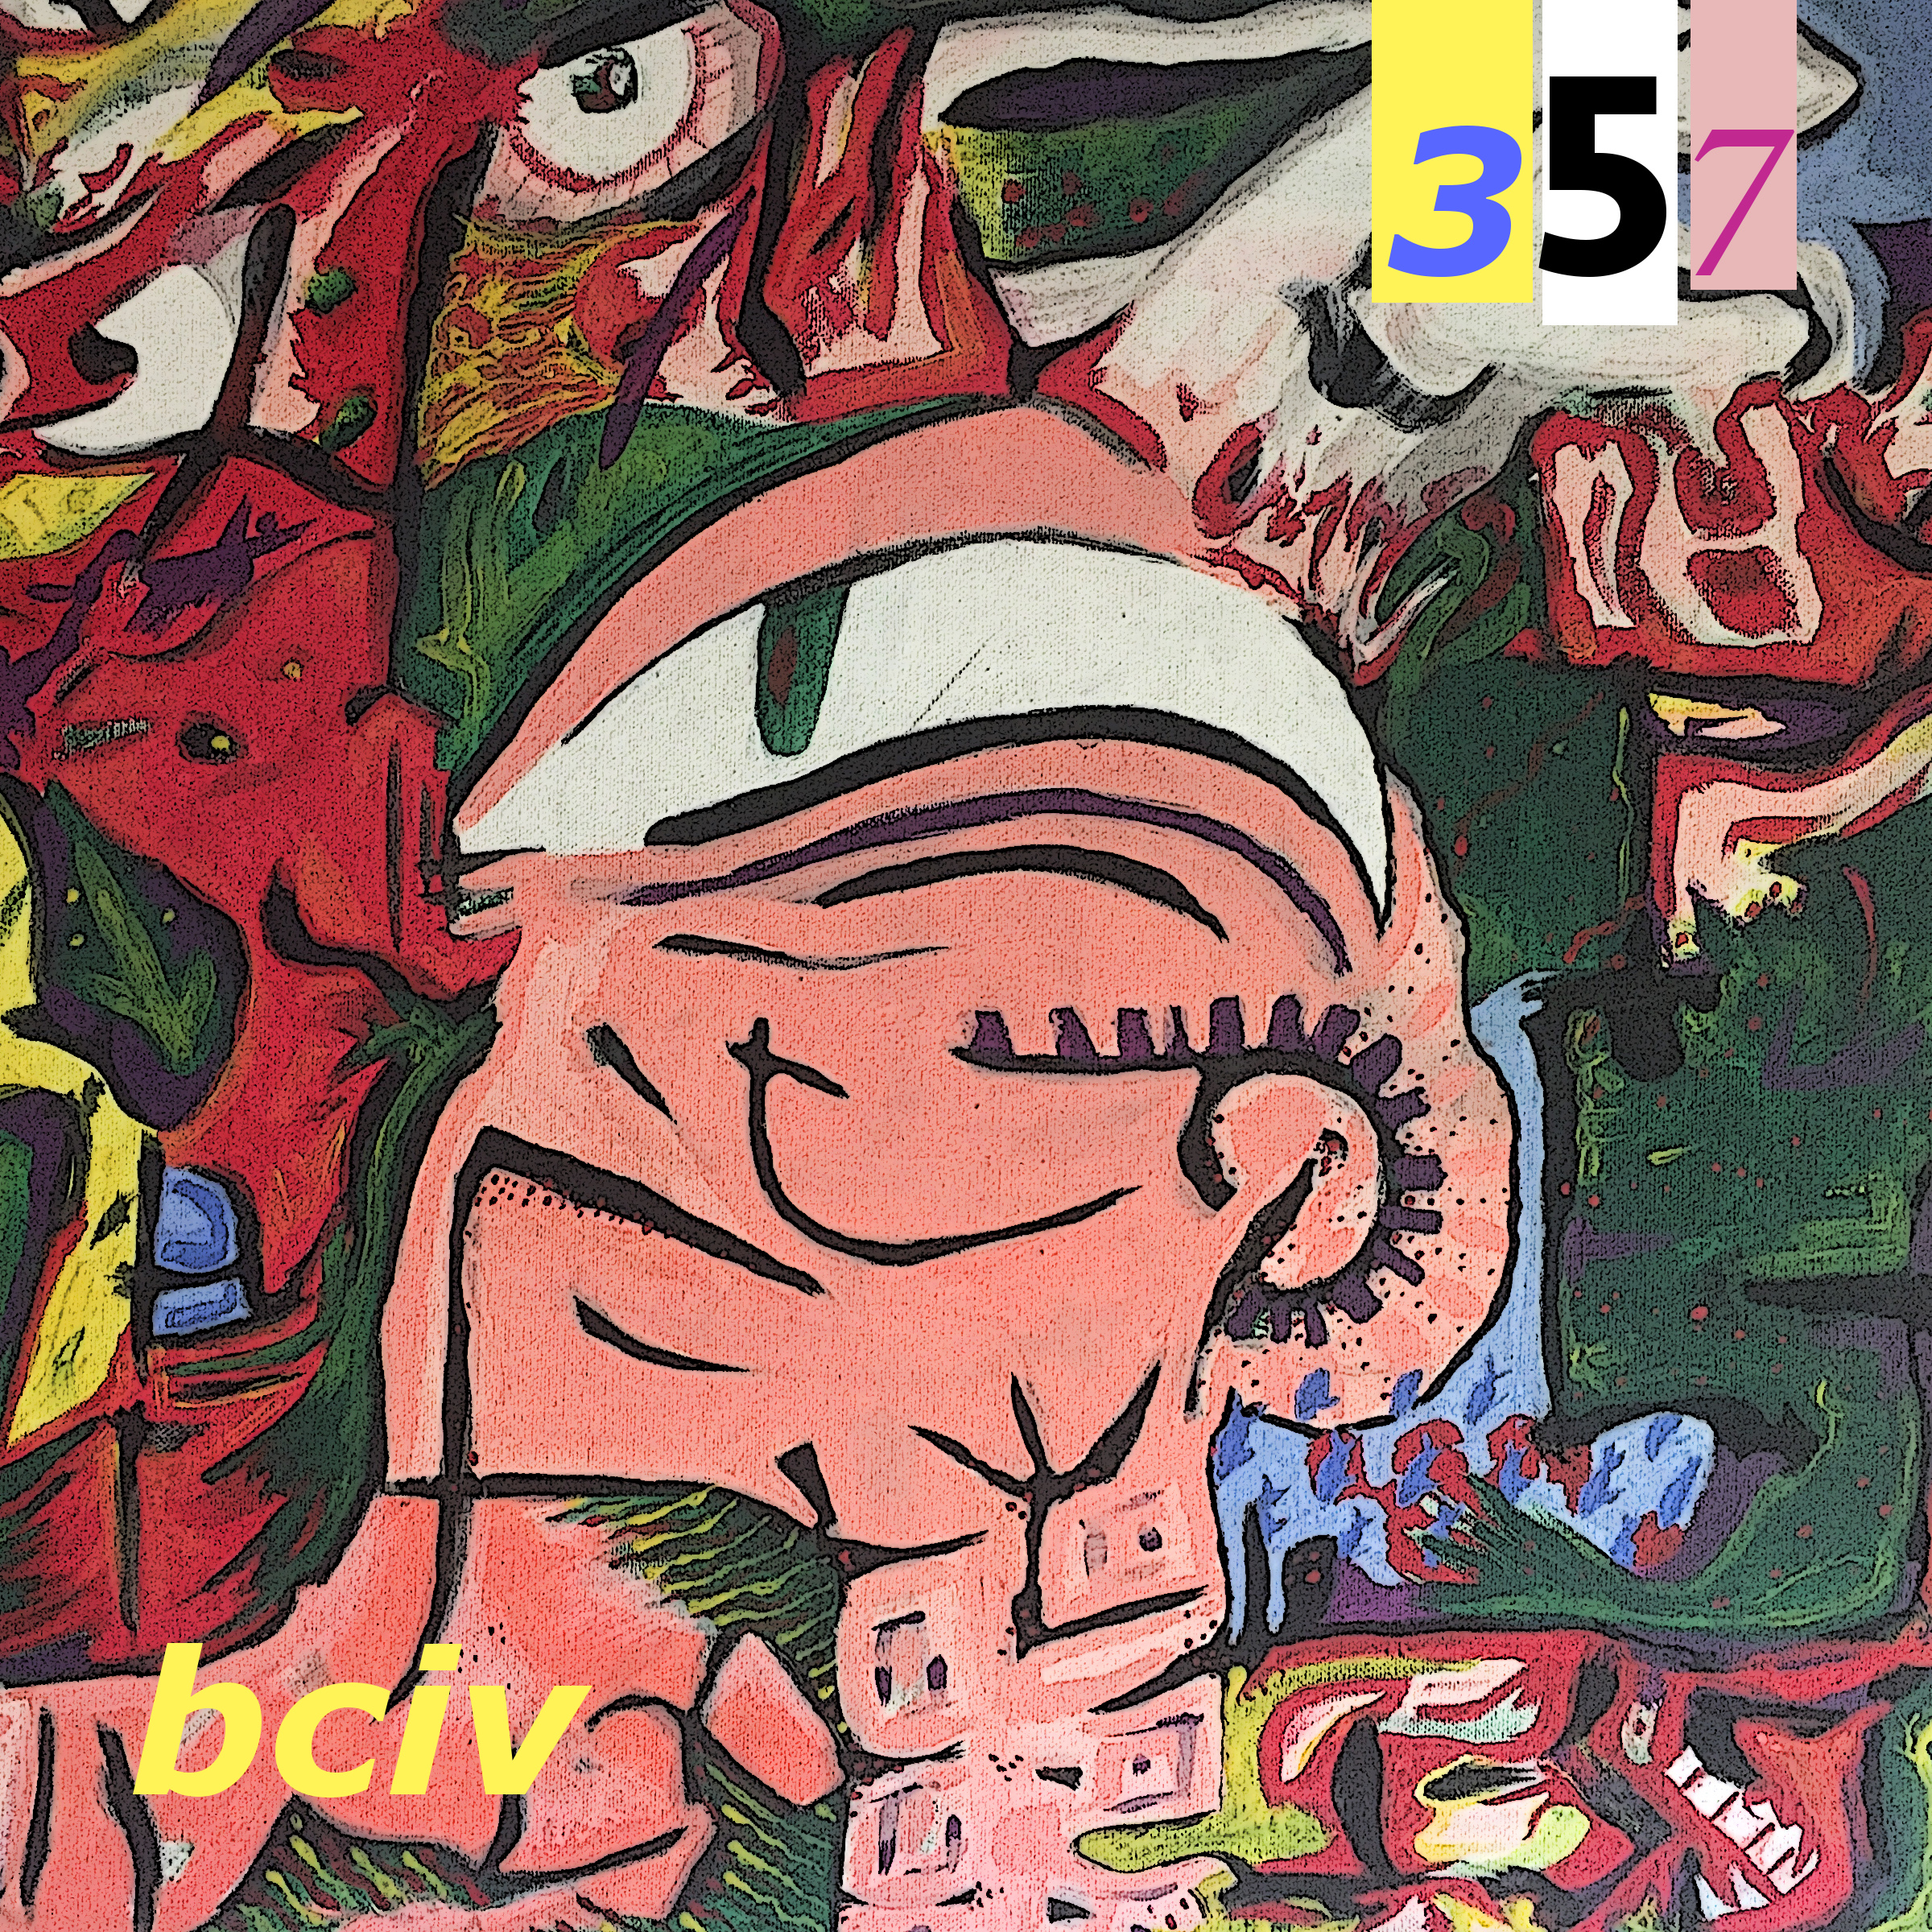 357 album cover. Brash painting showing a central figure surrounded by various stimuli.